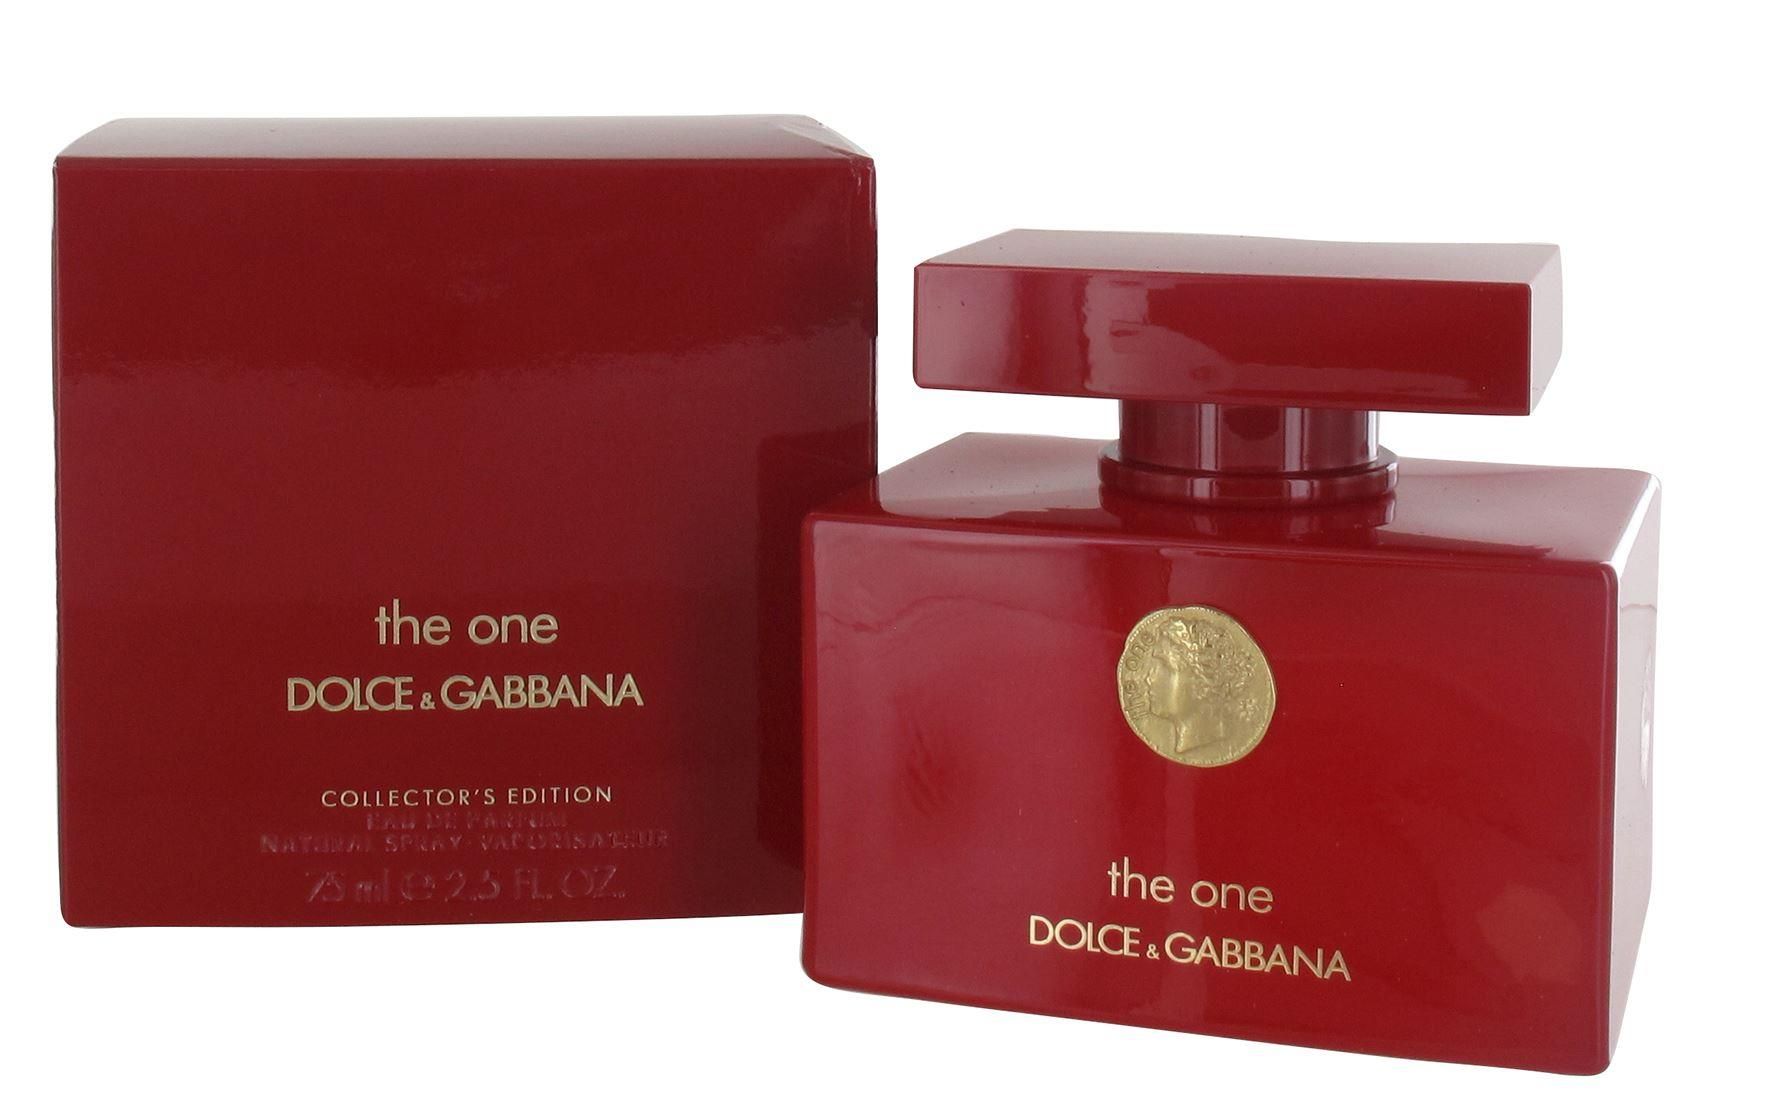 the one dolce gabbana collector's edition